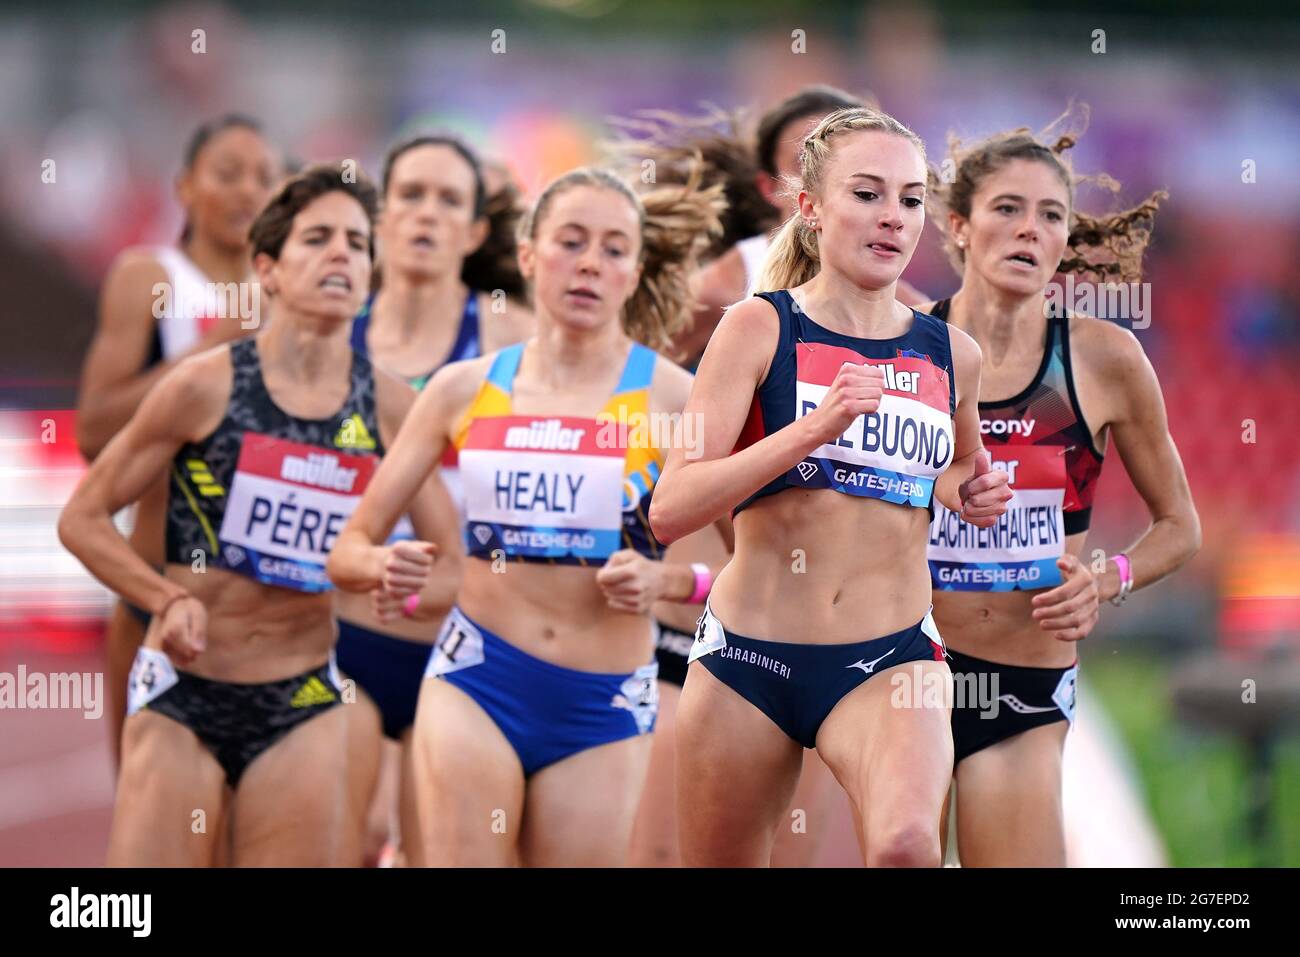 Italy’s Federica Del Buono competes in the Women’s 1 mile during the Muller British Grand Prix meeting in the Wanda Diamond League at Gateshead International Stadium. Picture date: Tuesday July 13, 2021. Stock Photo